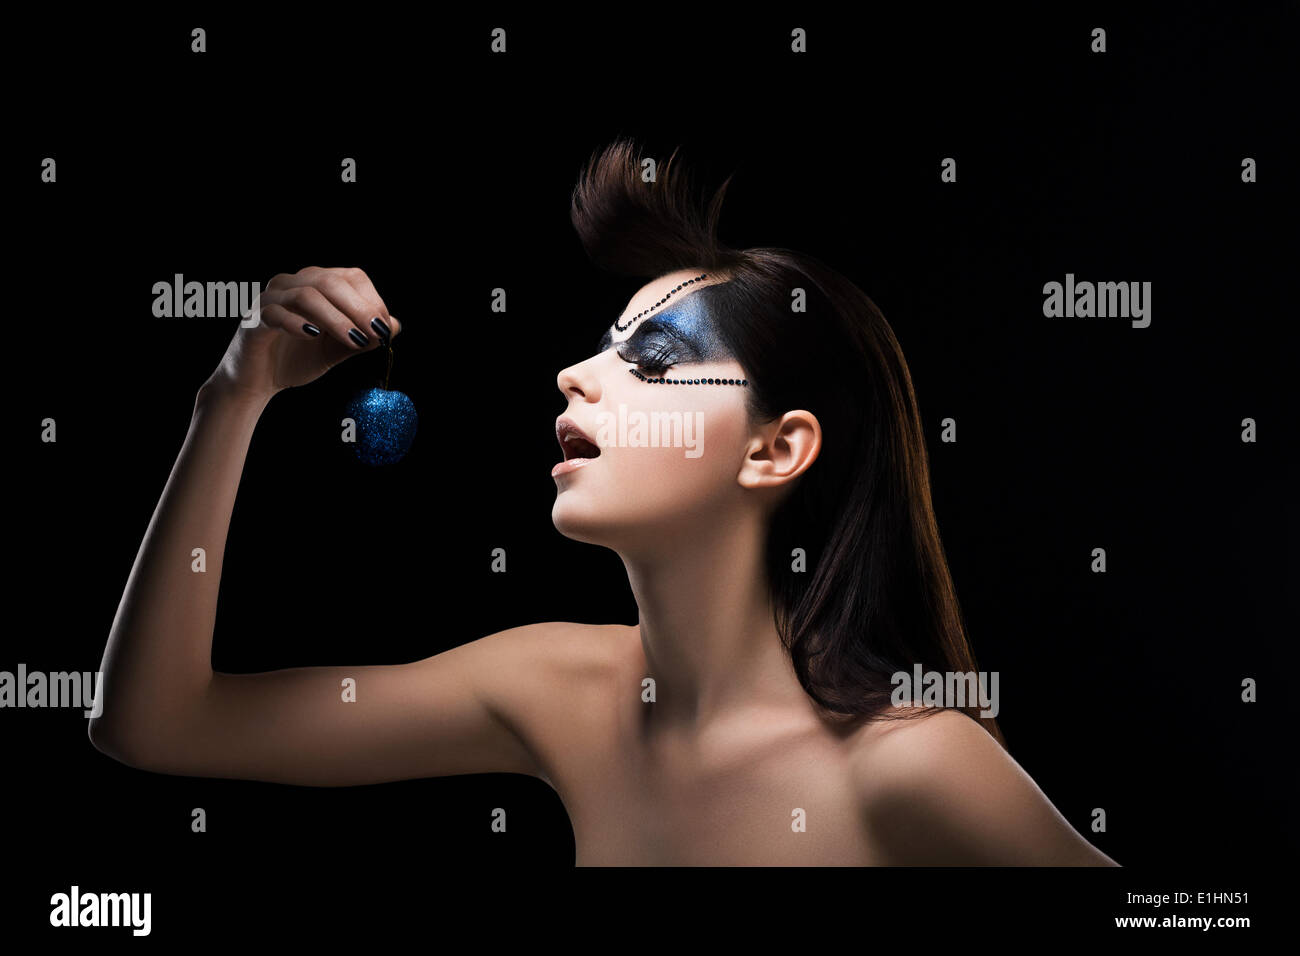 Fantasy. Image of Fancy Woman holding a Blue Ball in hand. Inspiration Stock Photo